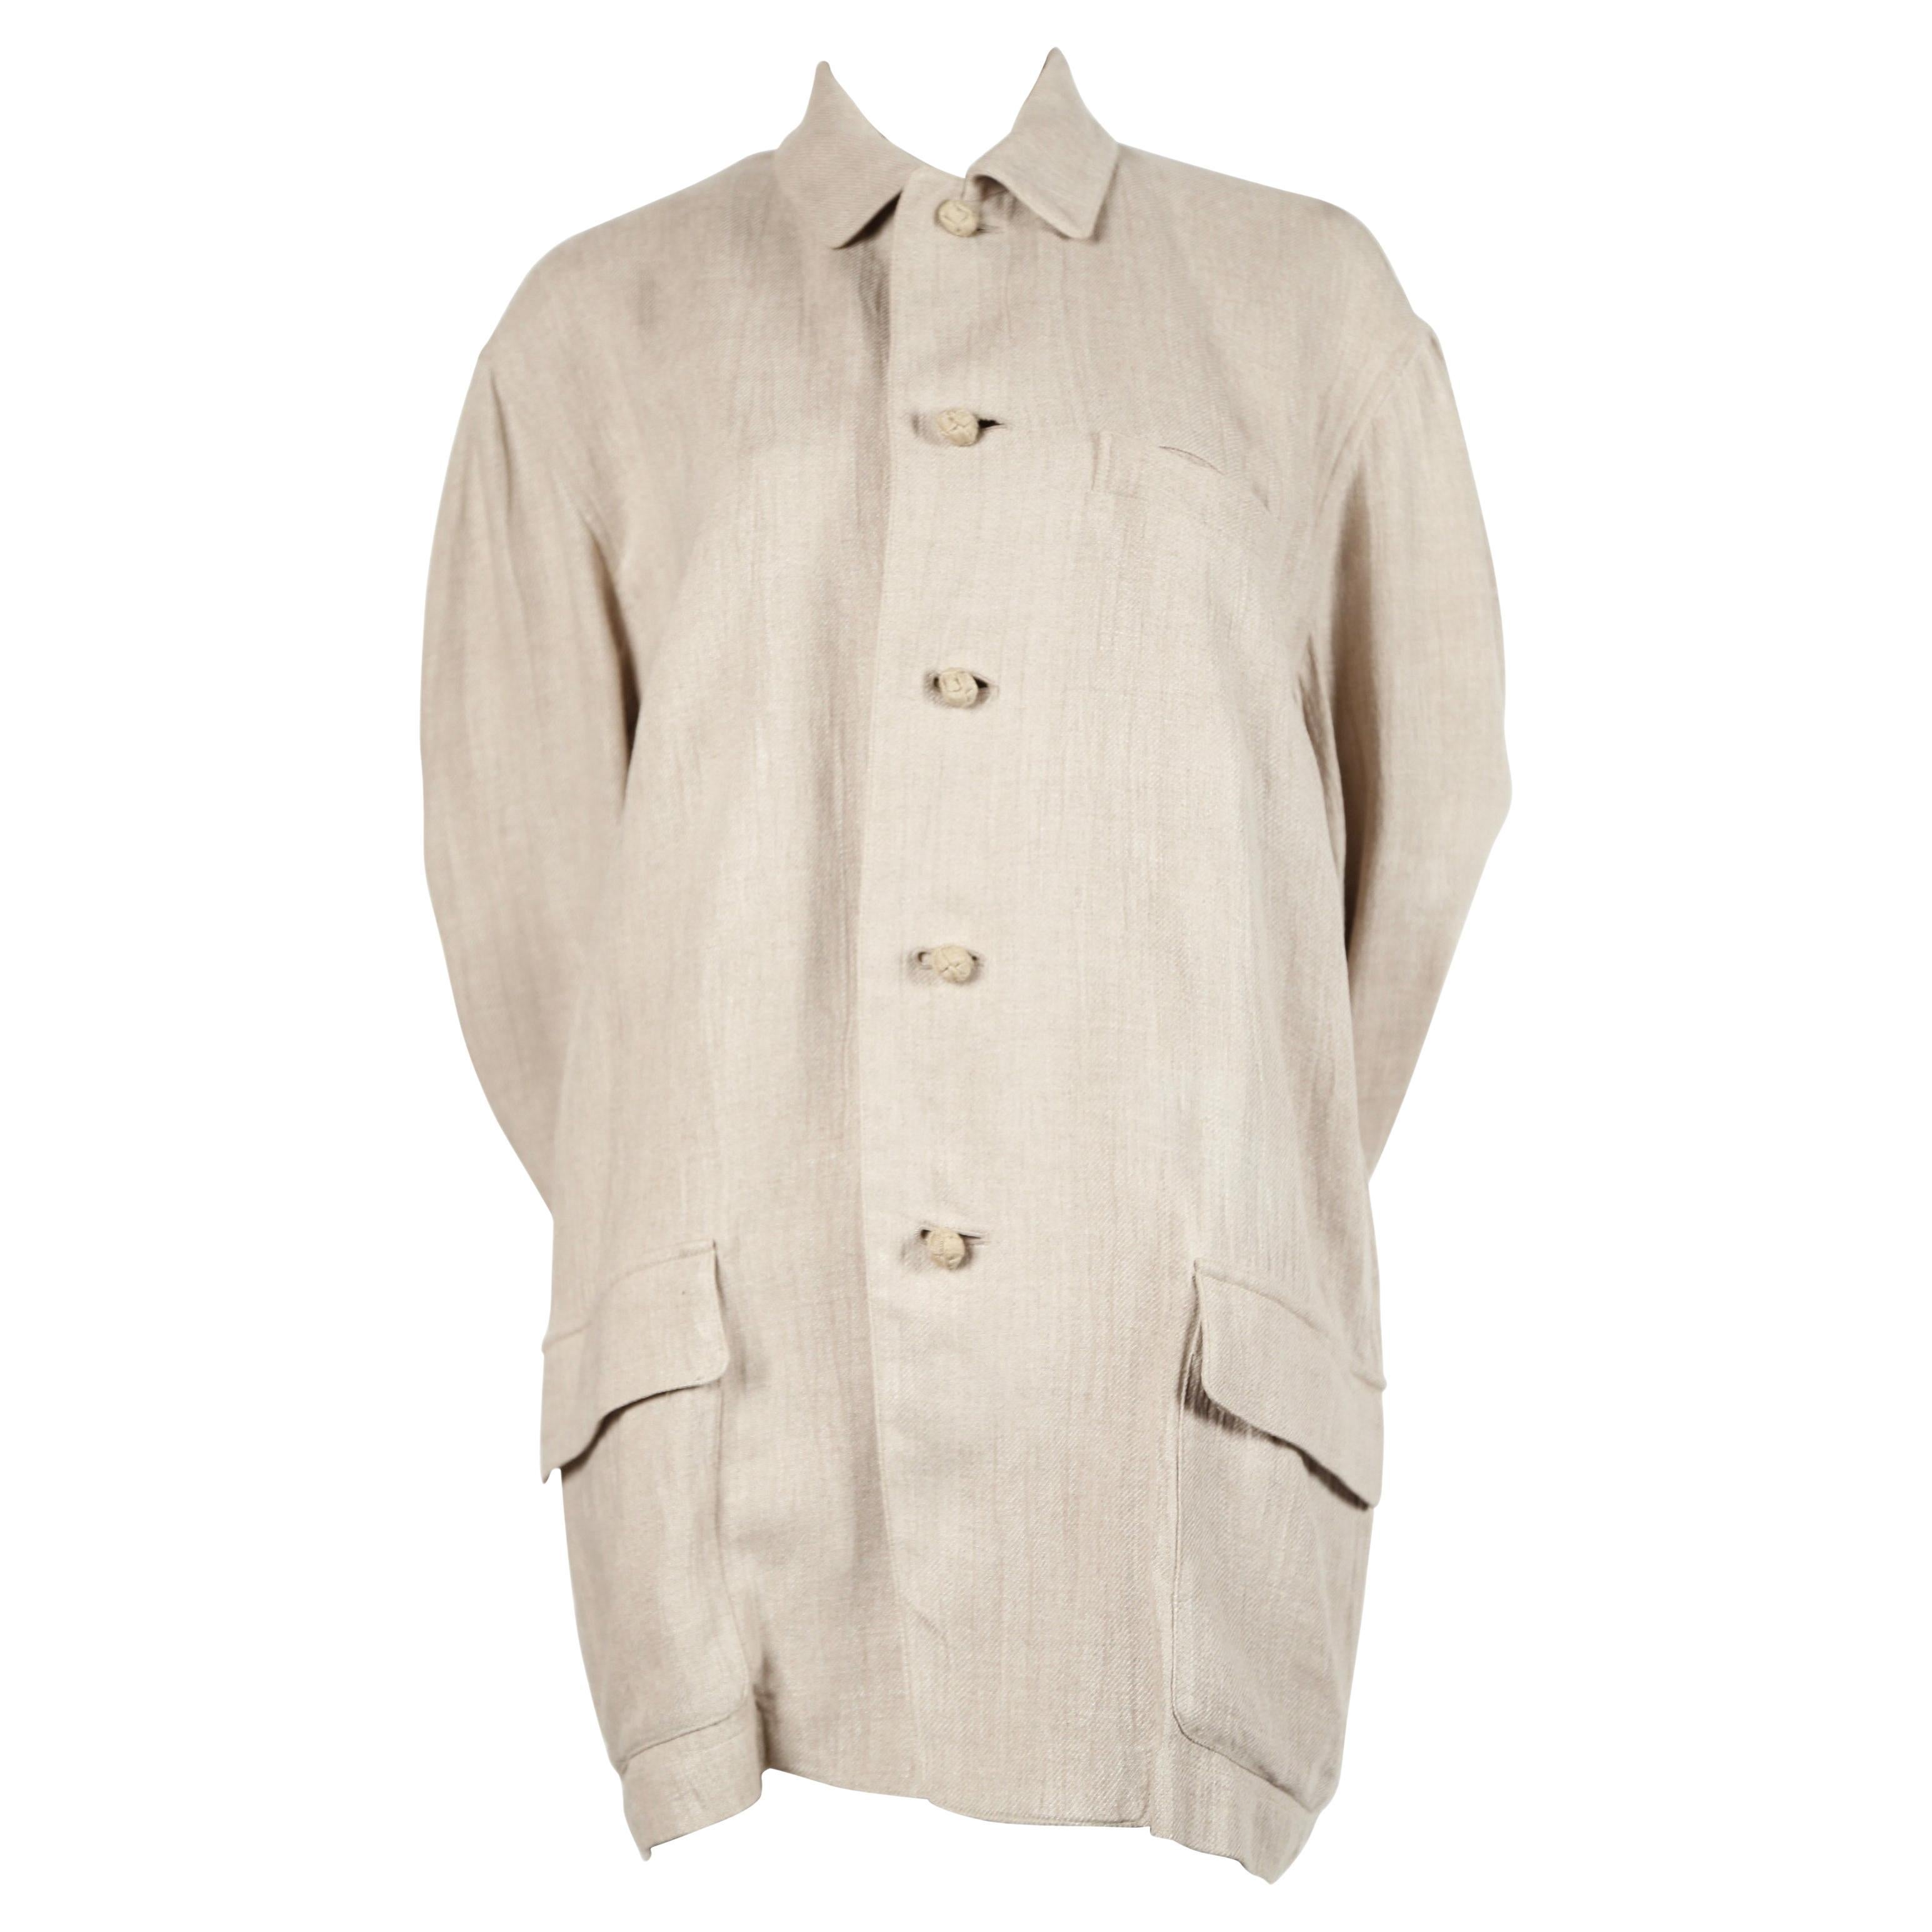 1980's ISSEY MIYAKE PLANTATION linen jacket with knotted fabric